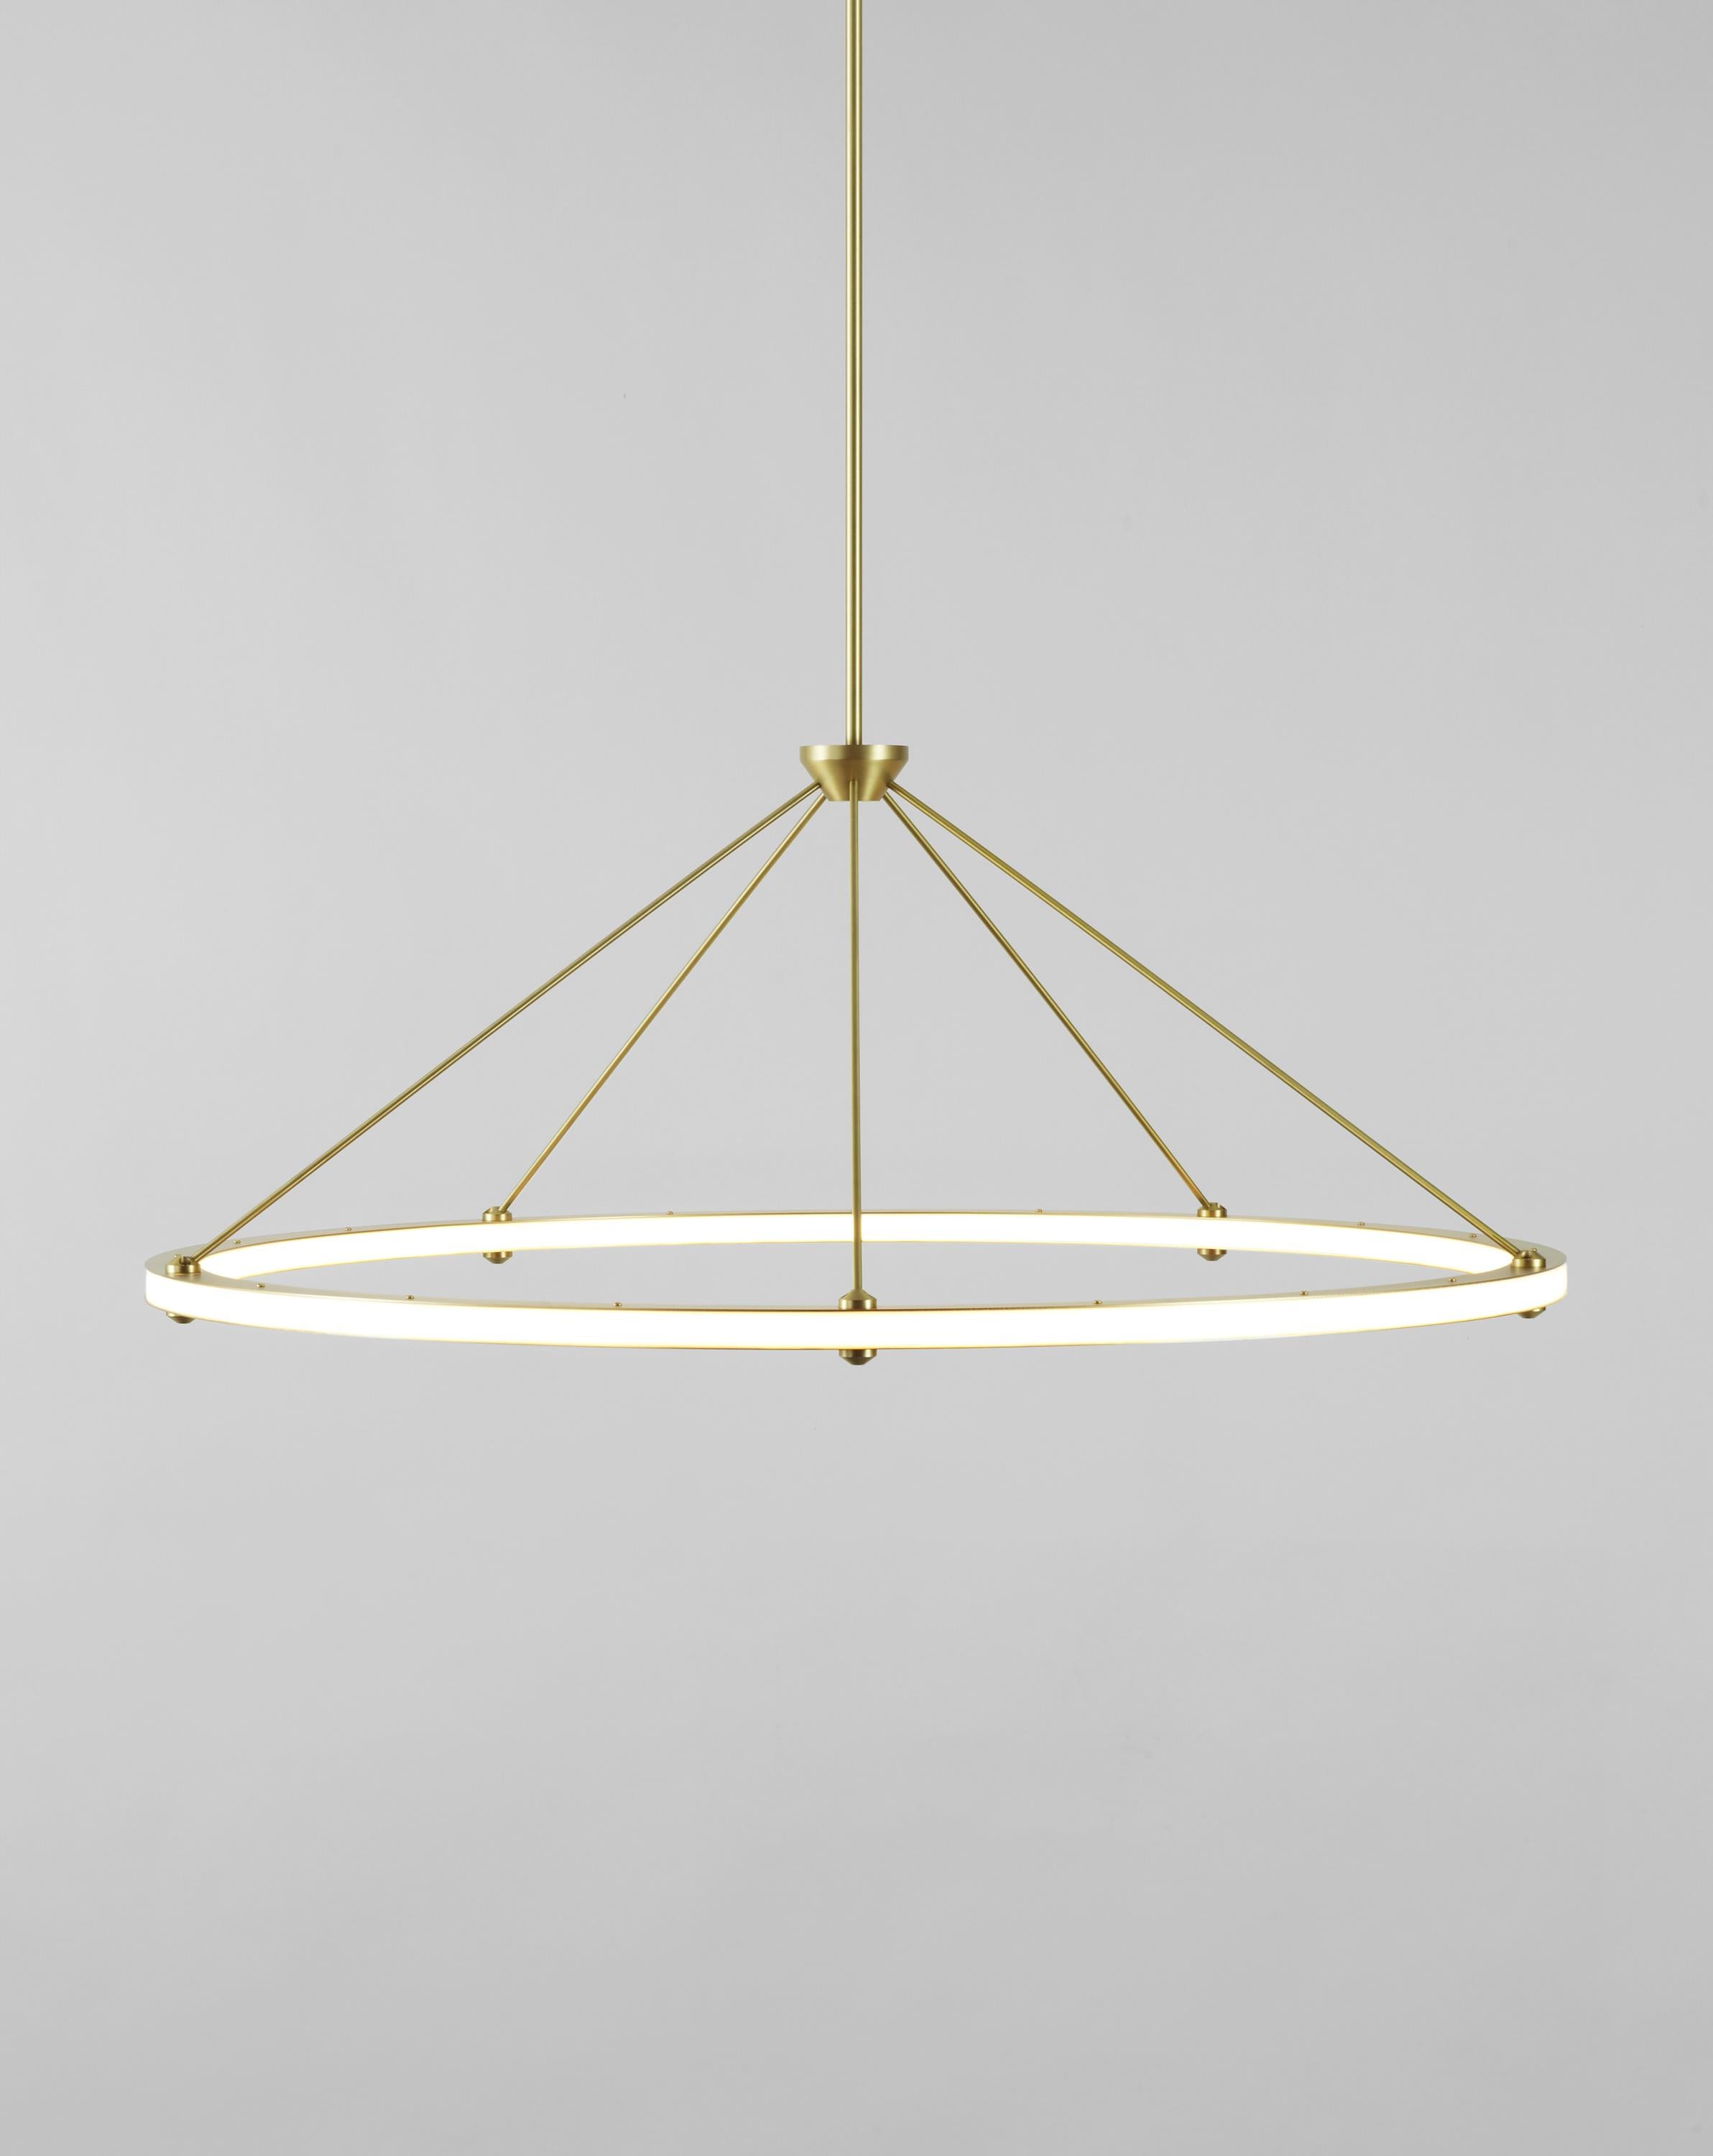 American Halo Circle Pendant Light in Black by Paul Loebach for Roll & Hill